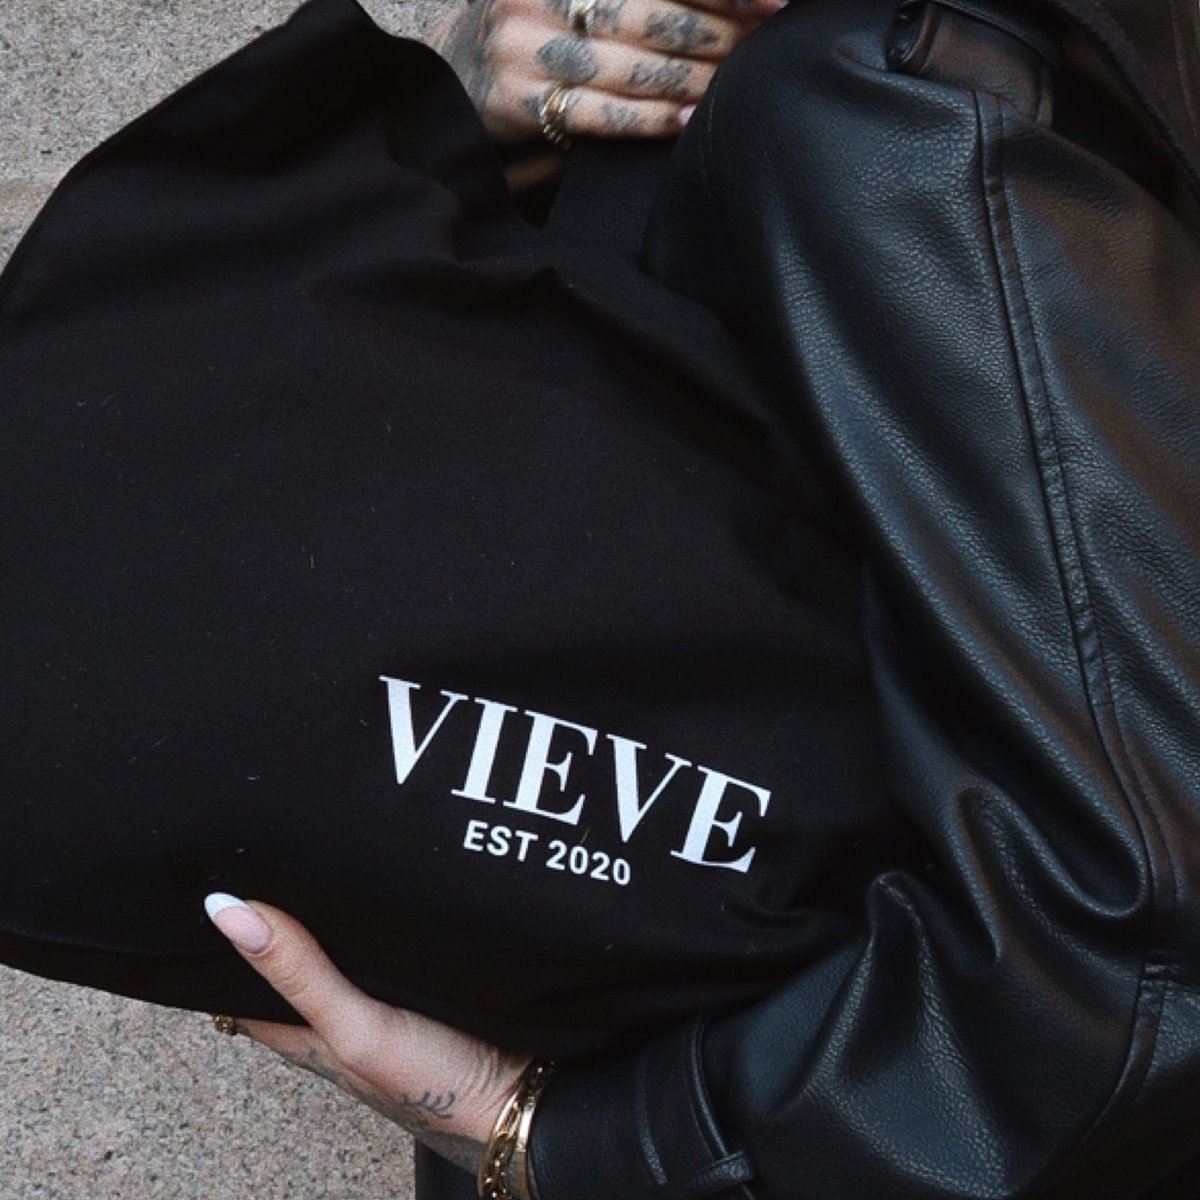 Designed to fit all of your essentials in, and more. The Everyday Tote is the perfect travel companion, whether for day-to-day or a weekend getaway. Where will you take yours? #VIEVE